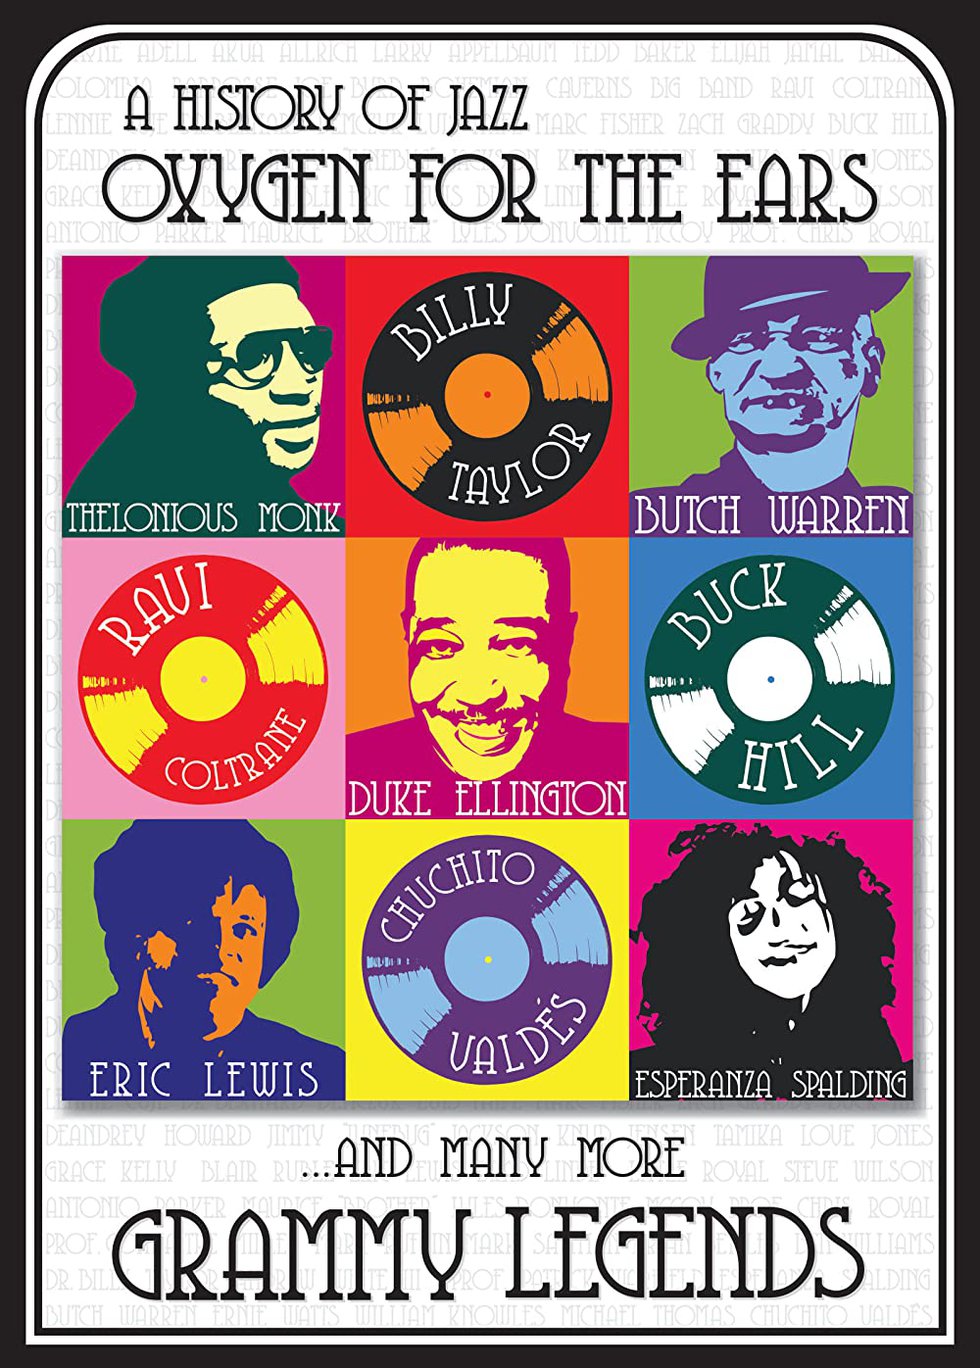 Oxygen for the Ears: Living Jazz poster